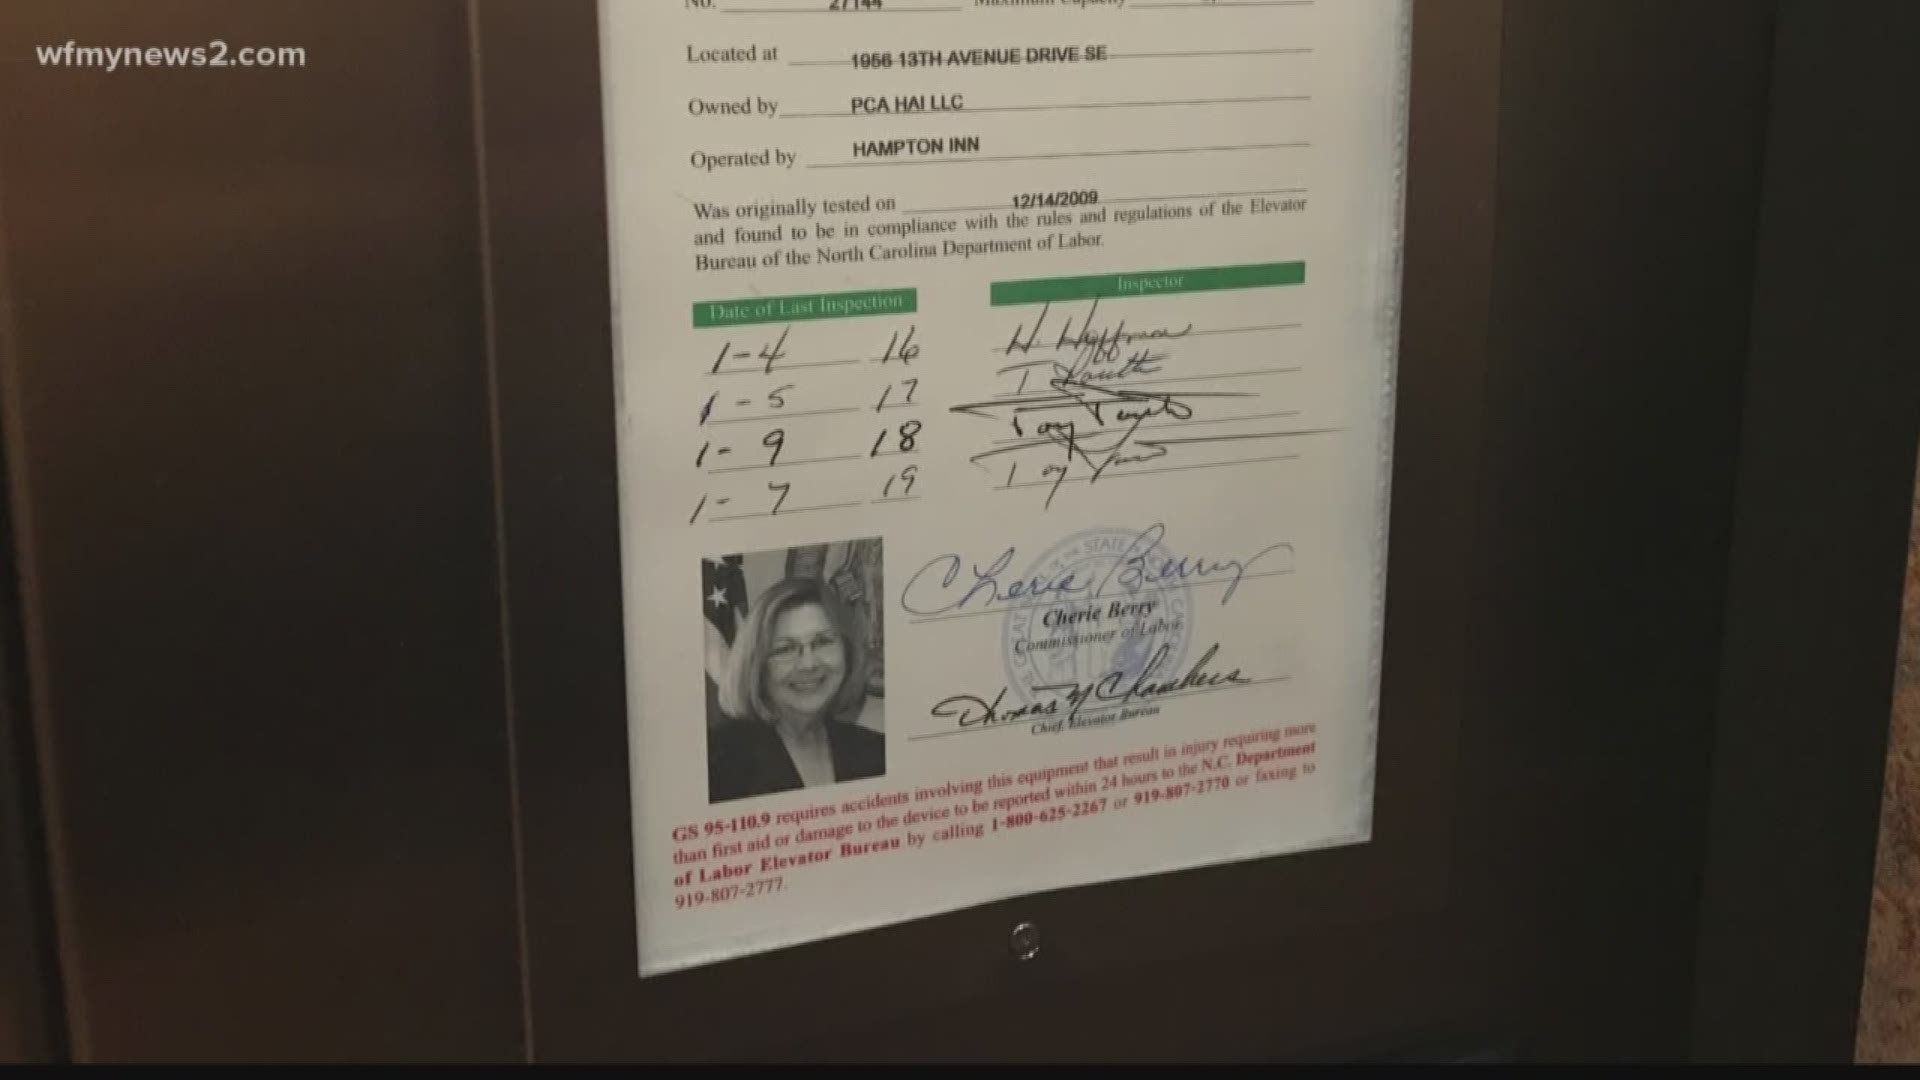 Chances are if you’ve been in an elevator in North Carolina, you can thank Cherie Berry for making sure it’s a safe one.